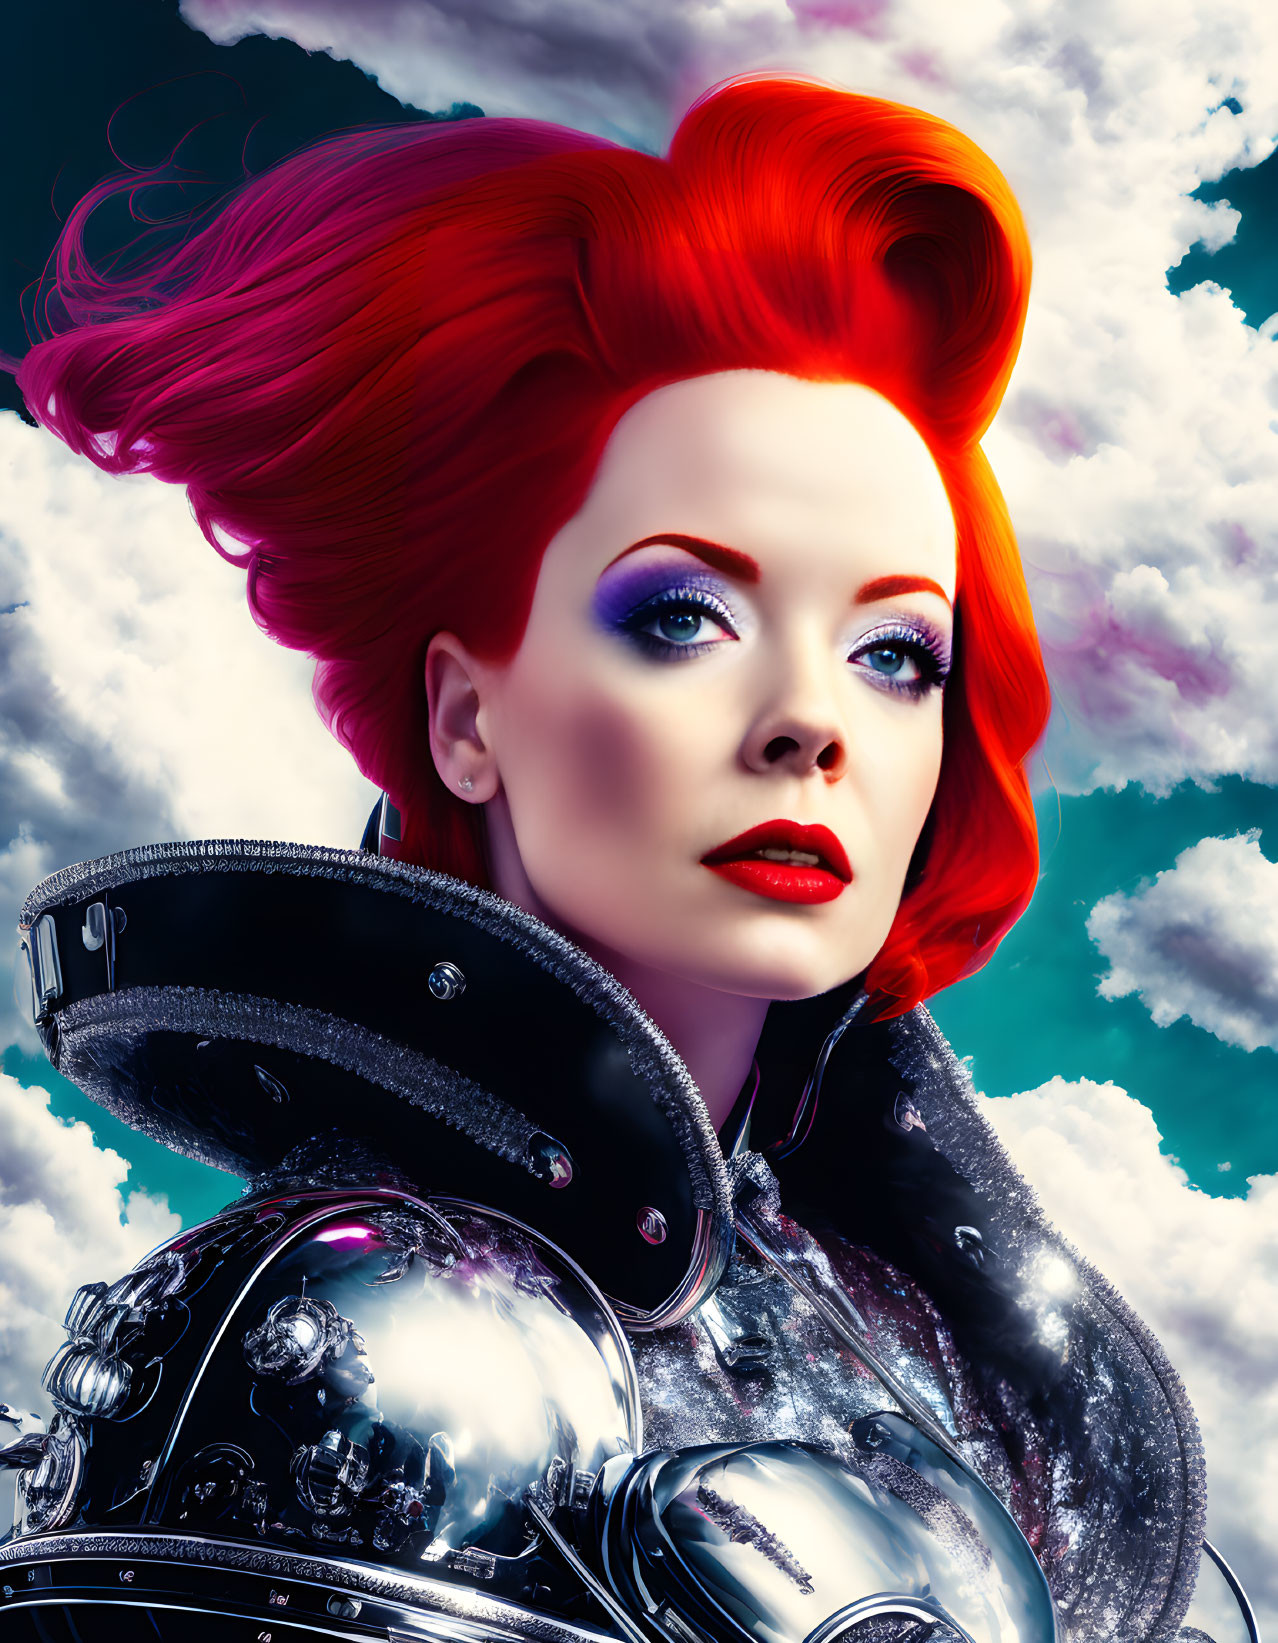 Vibrant digital portrait: Woman with red hair, bold makeup, futuristic armor against cloudy sky